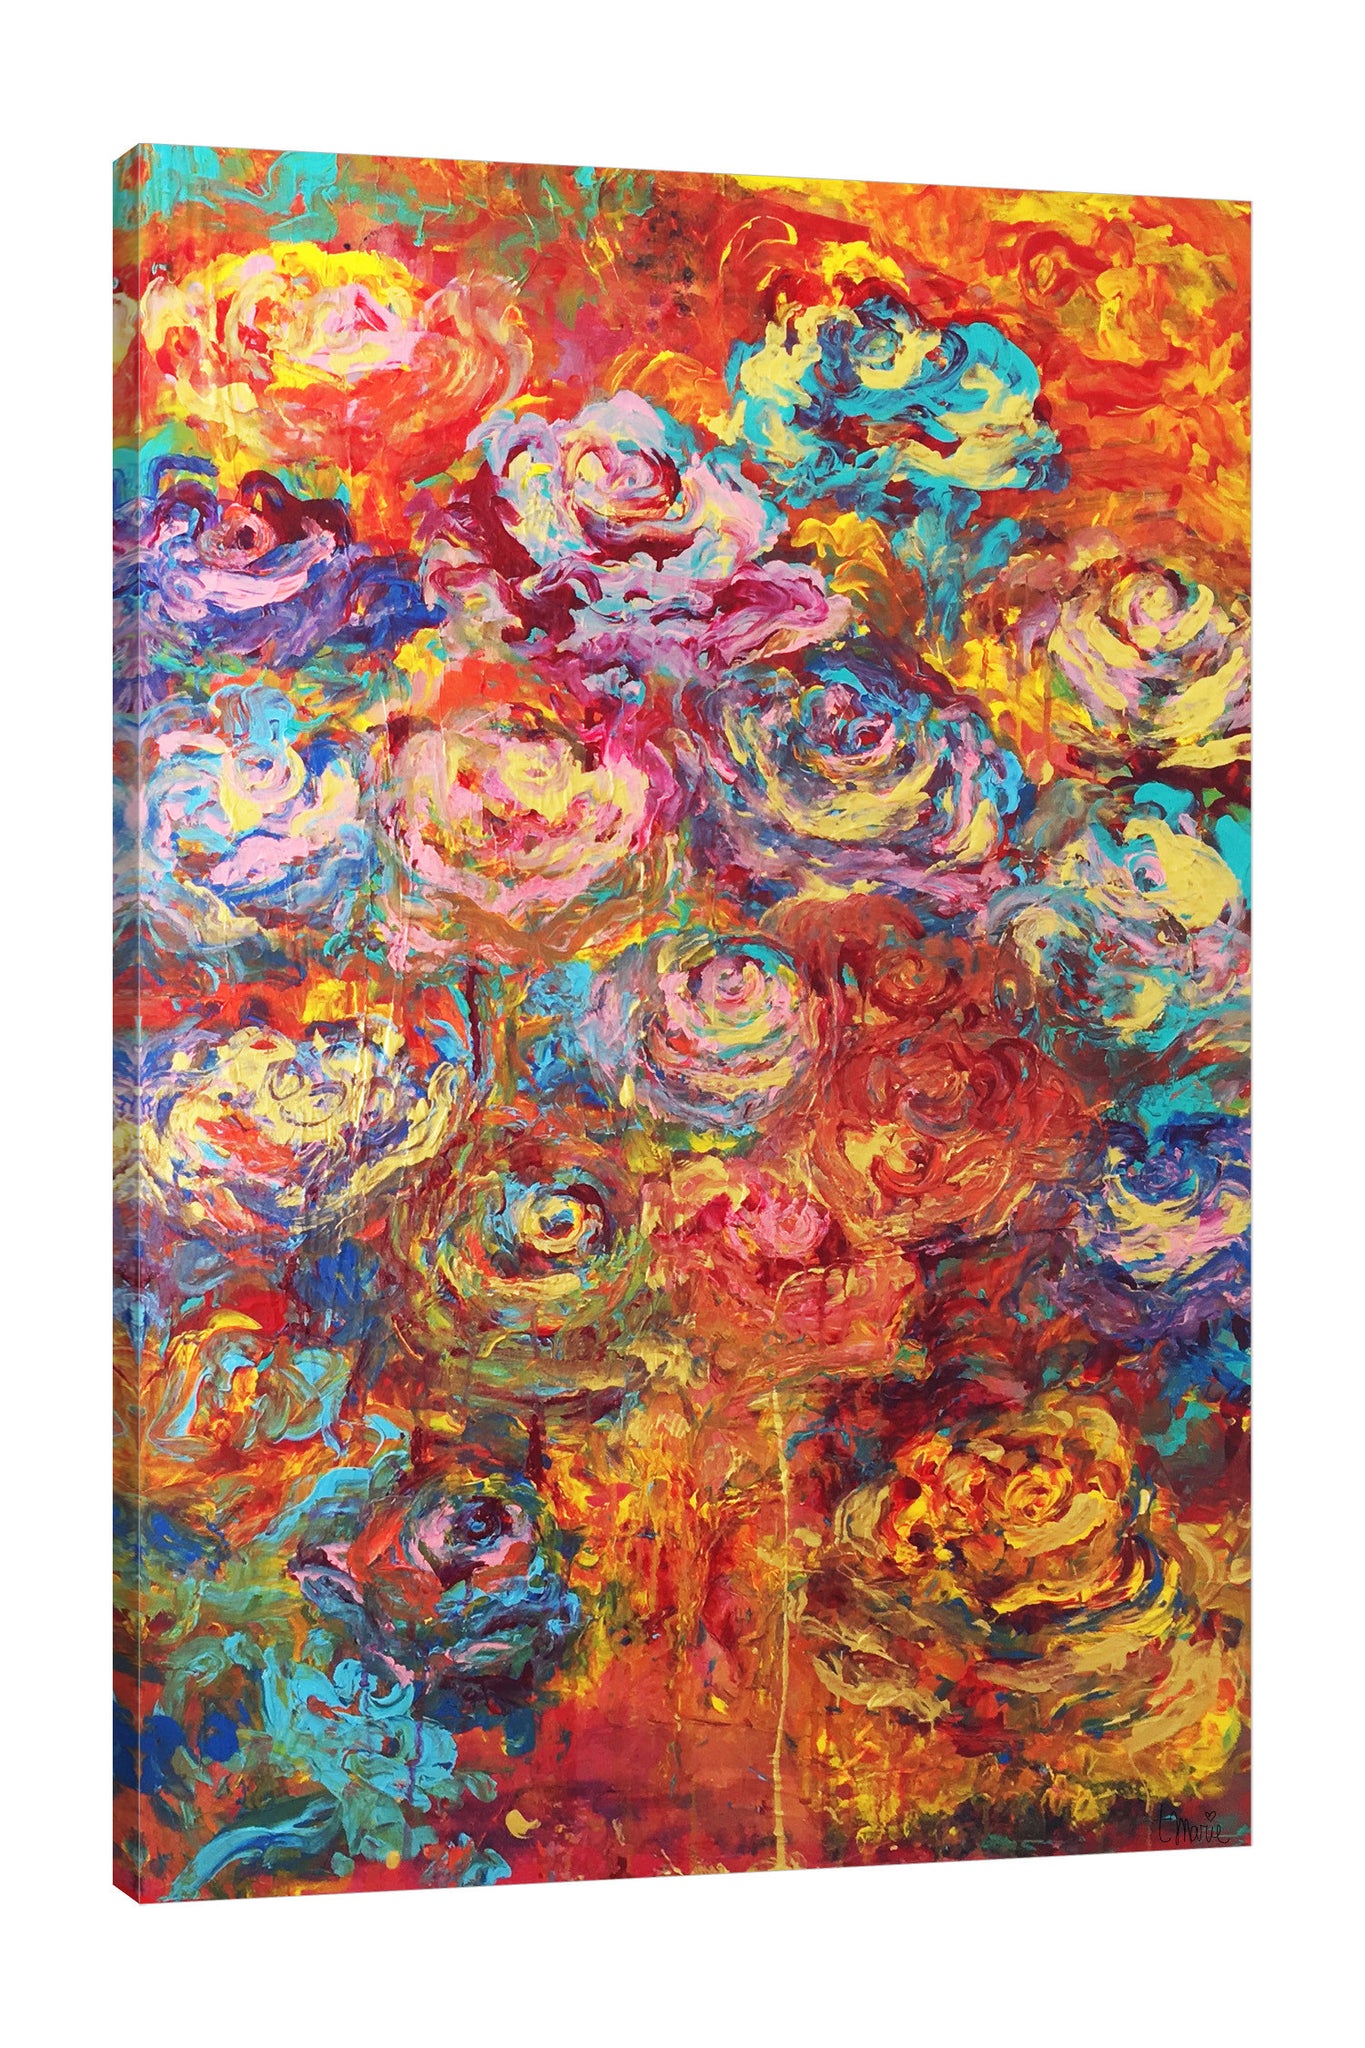 Sunset Rose by Taylor Marie - Gallery Wrapped Canvas Print Wall Art ...